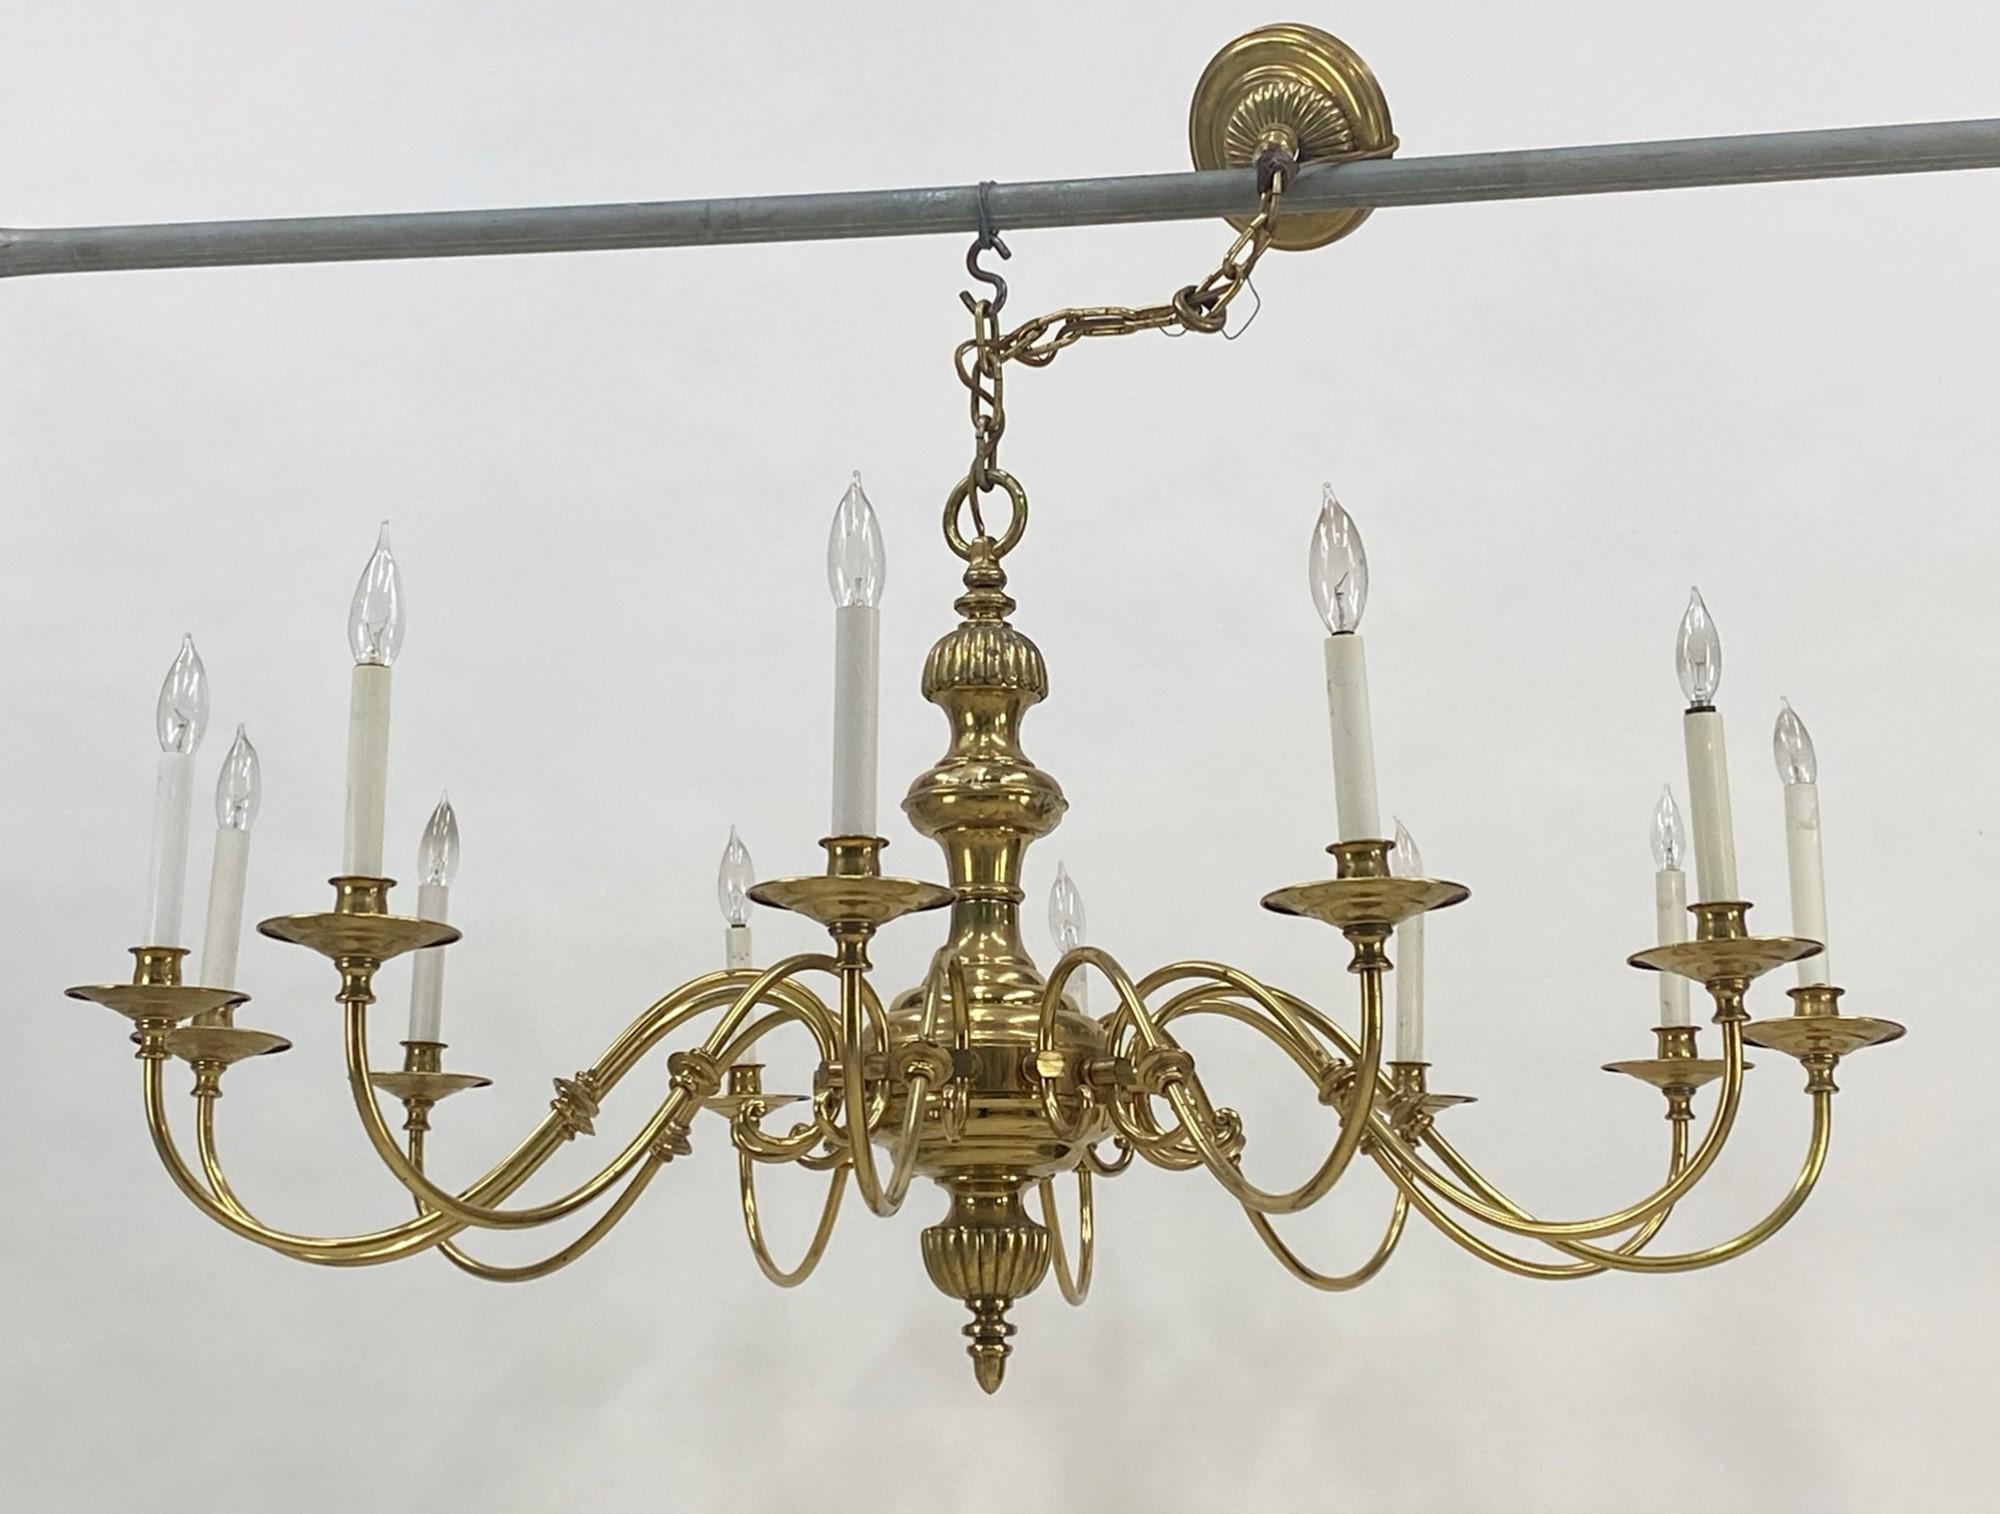 20th century brass 12 arm Williamsburg ballroom chandelier. Cleaned and rewired. Small quantity available at time of posting. Priced each. Please inquire. Please note, this item is located in our Scranton, PA location.